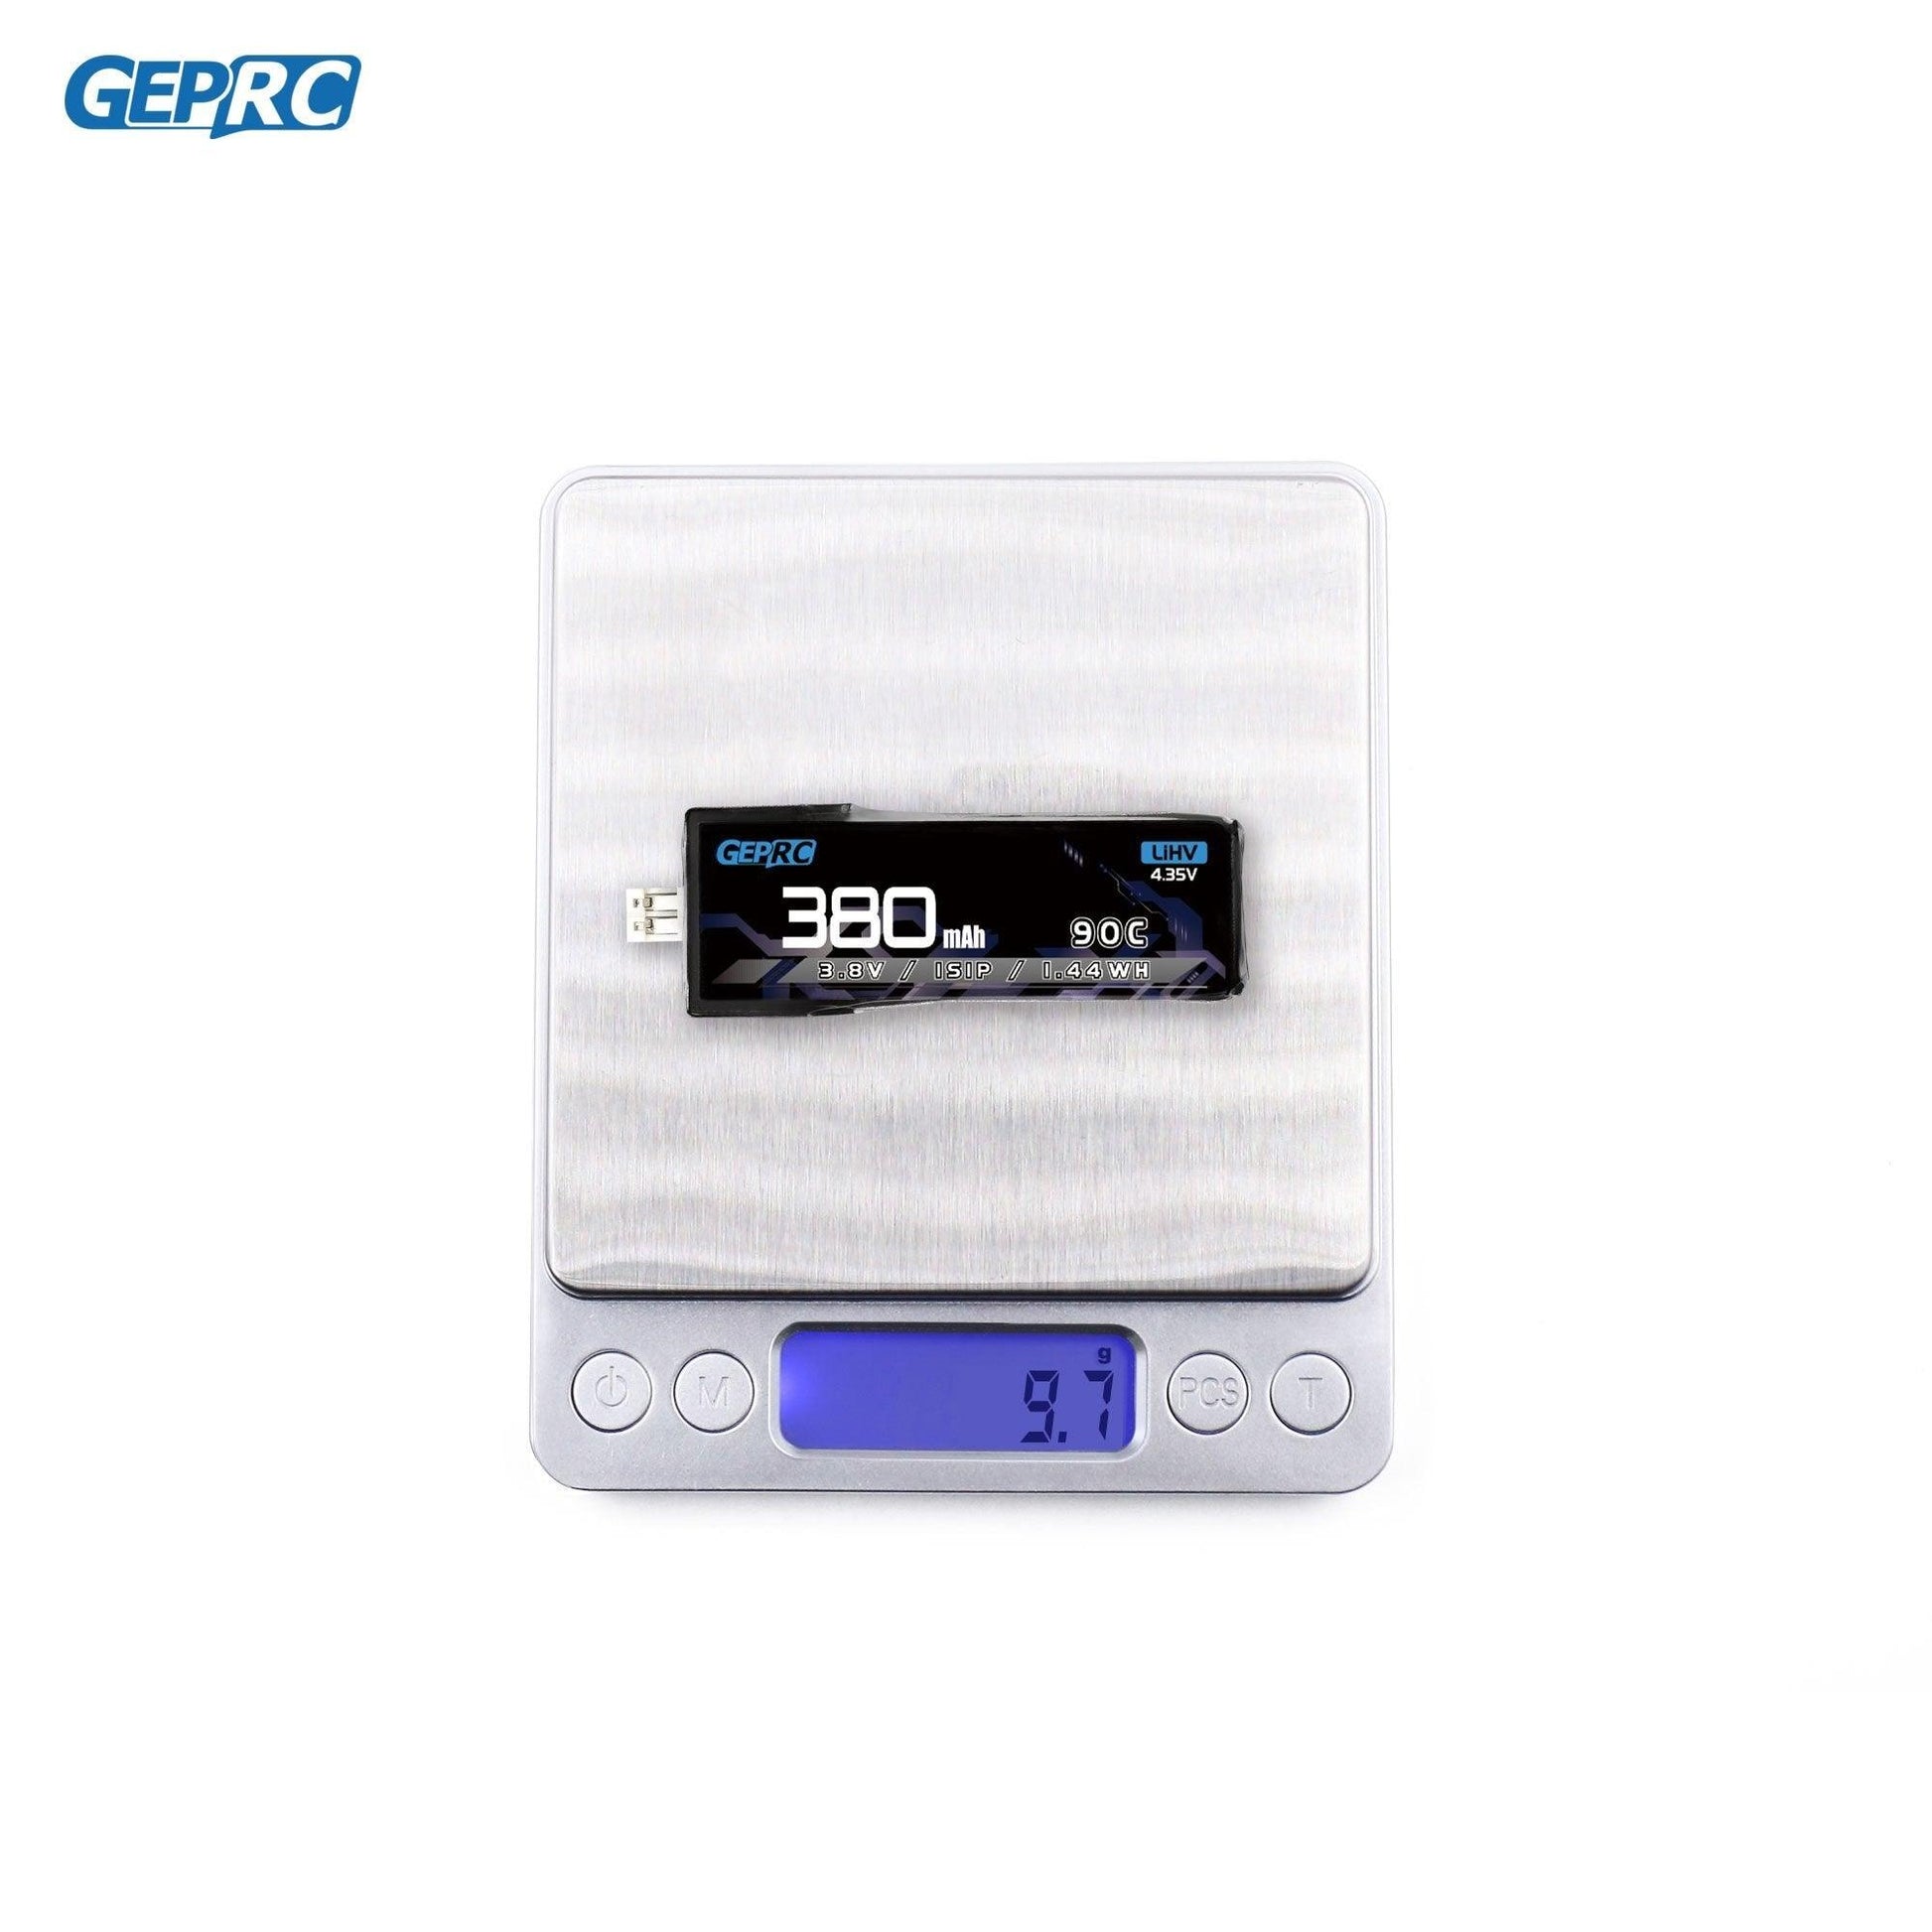 GEPRC 1S 380mAh 90C Battery - Suitable For SMART16 Series Drone For RC FPV Quadcopter Drone Accessories Parts - RCDrone